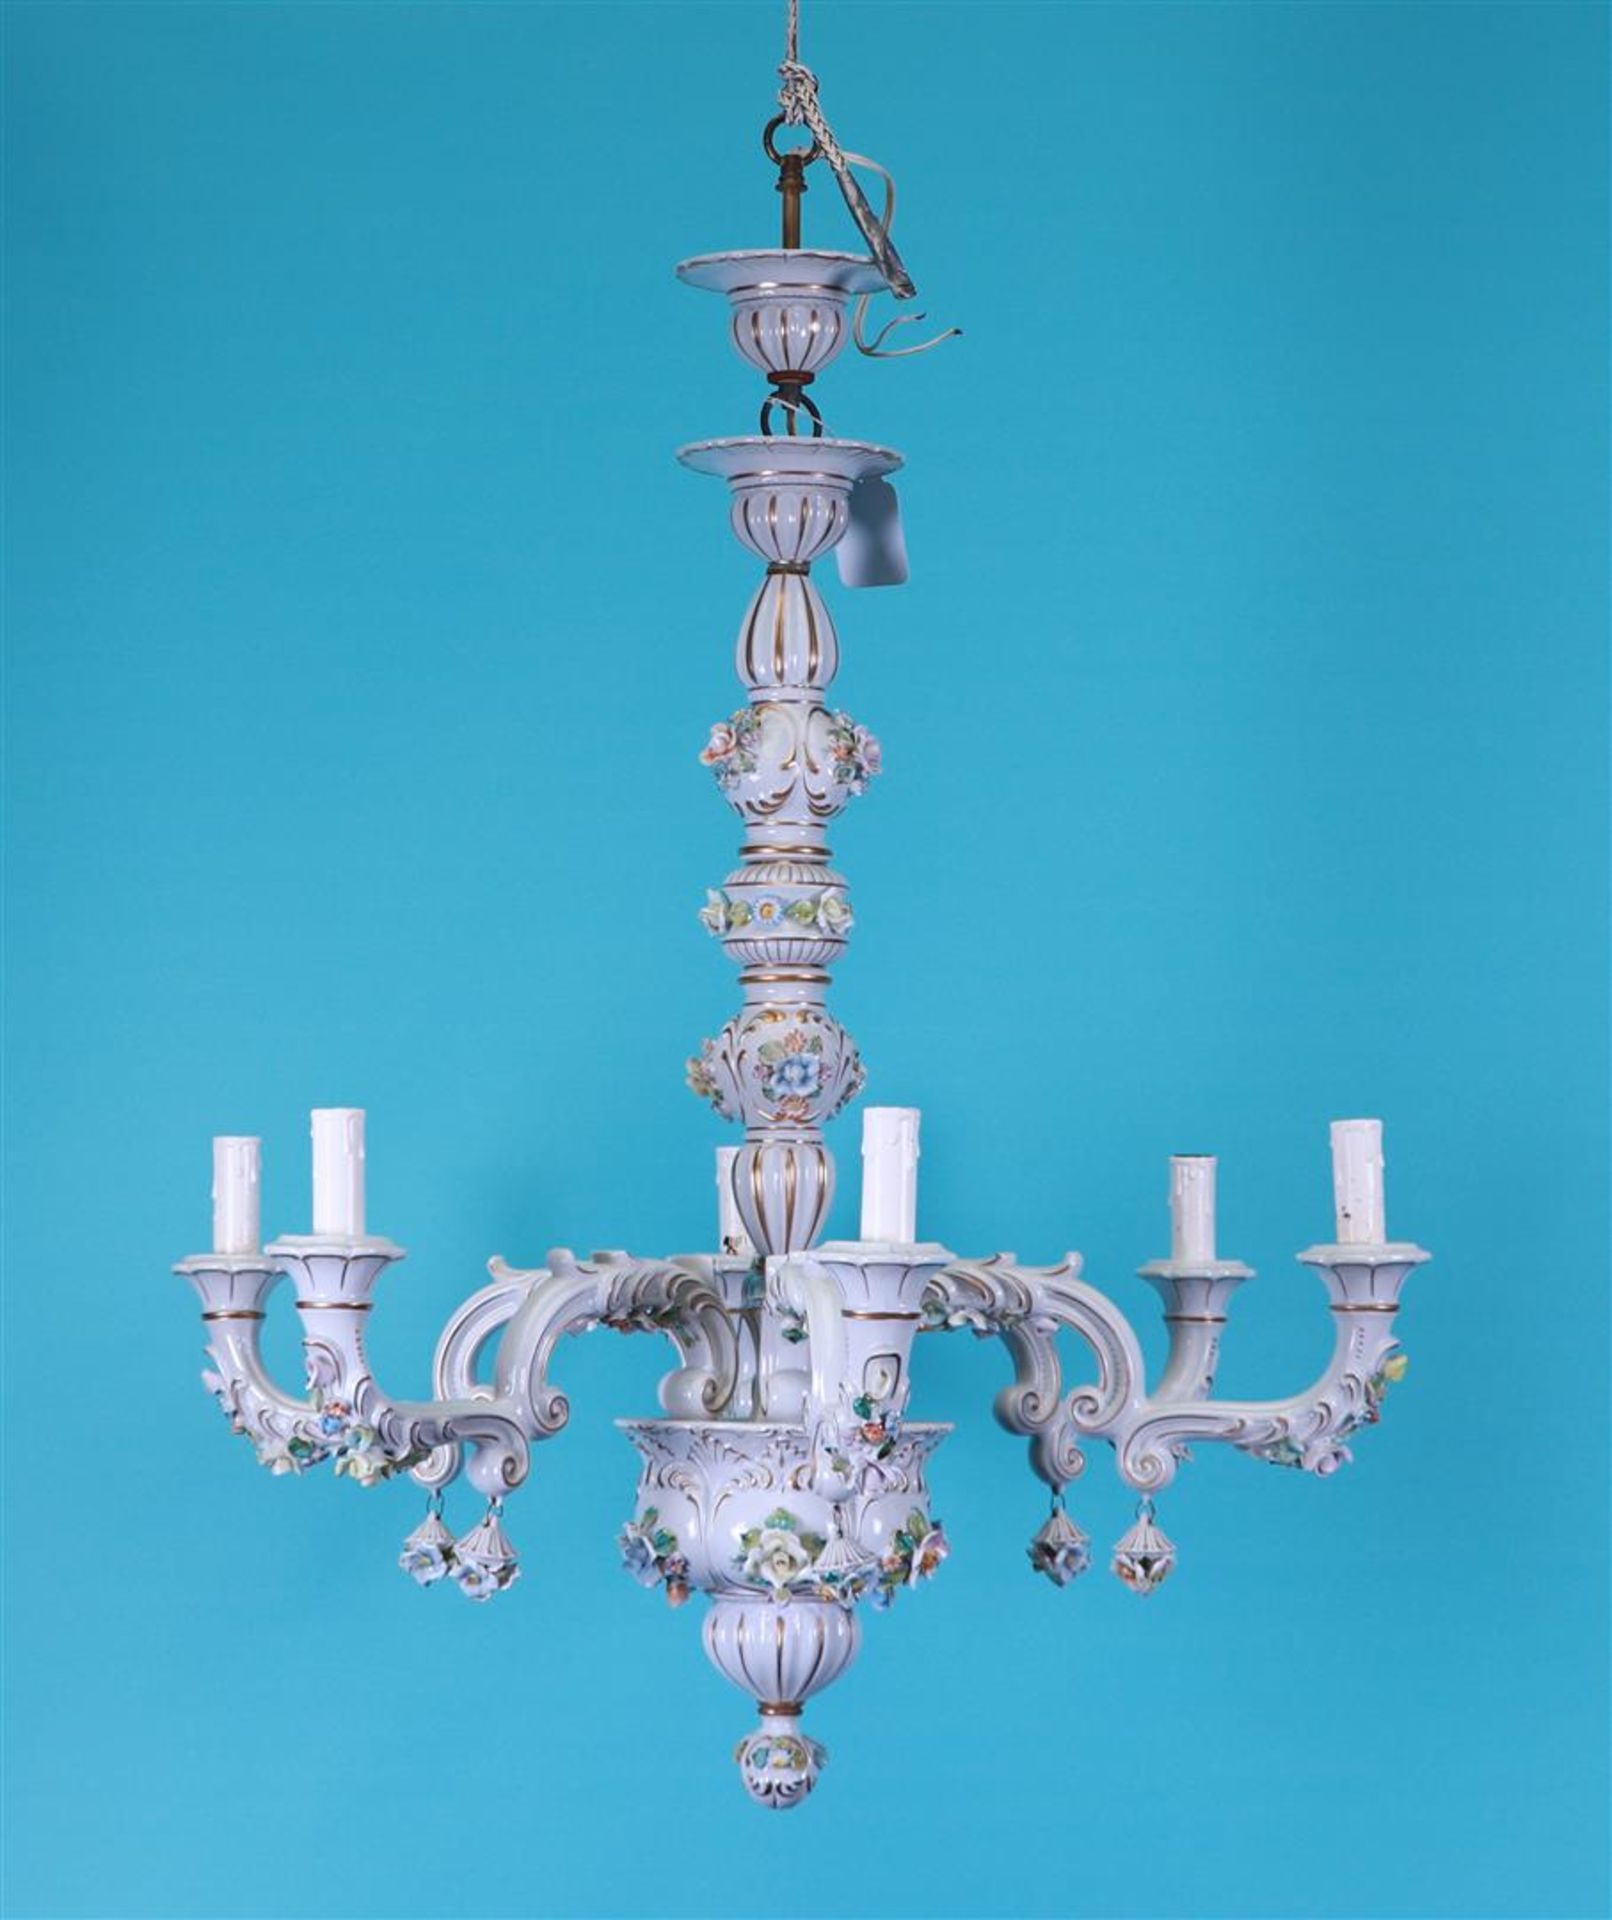 A five-armed porcelain chandelier decorated with flowers, marked Capodimonte. Naples, 20th century.
